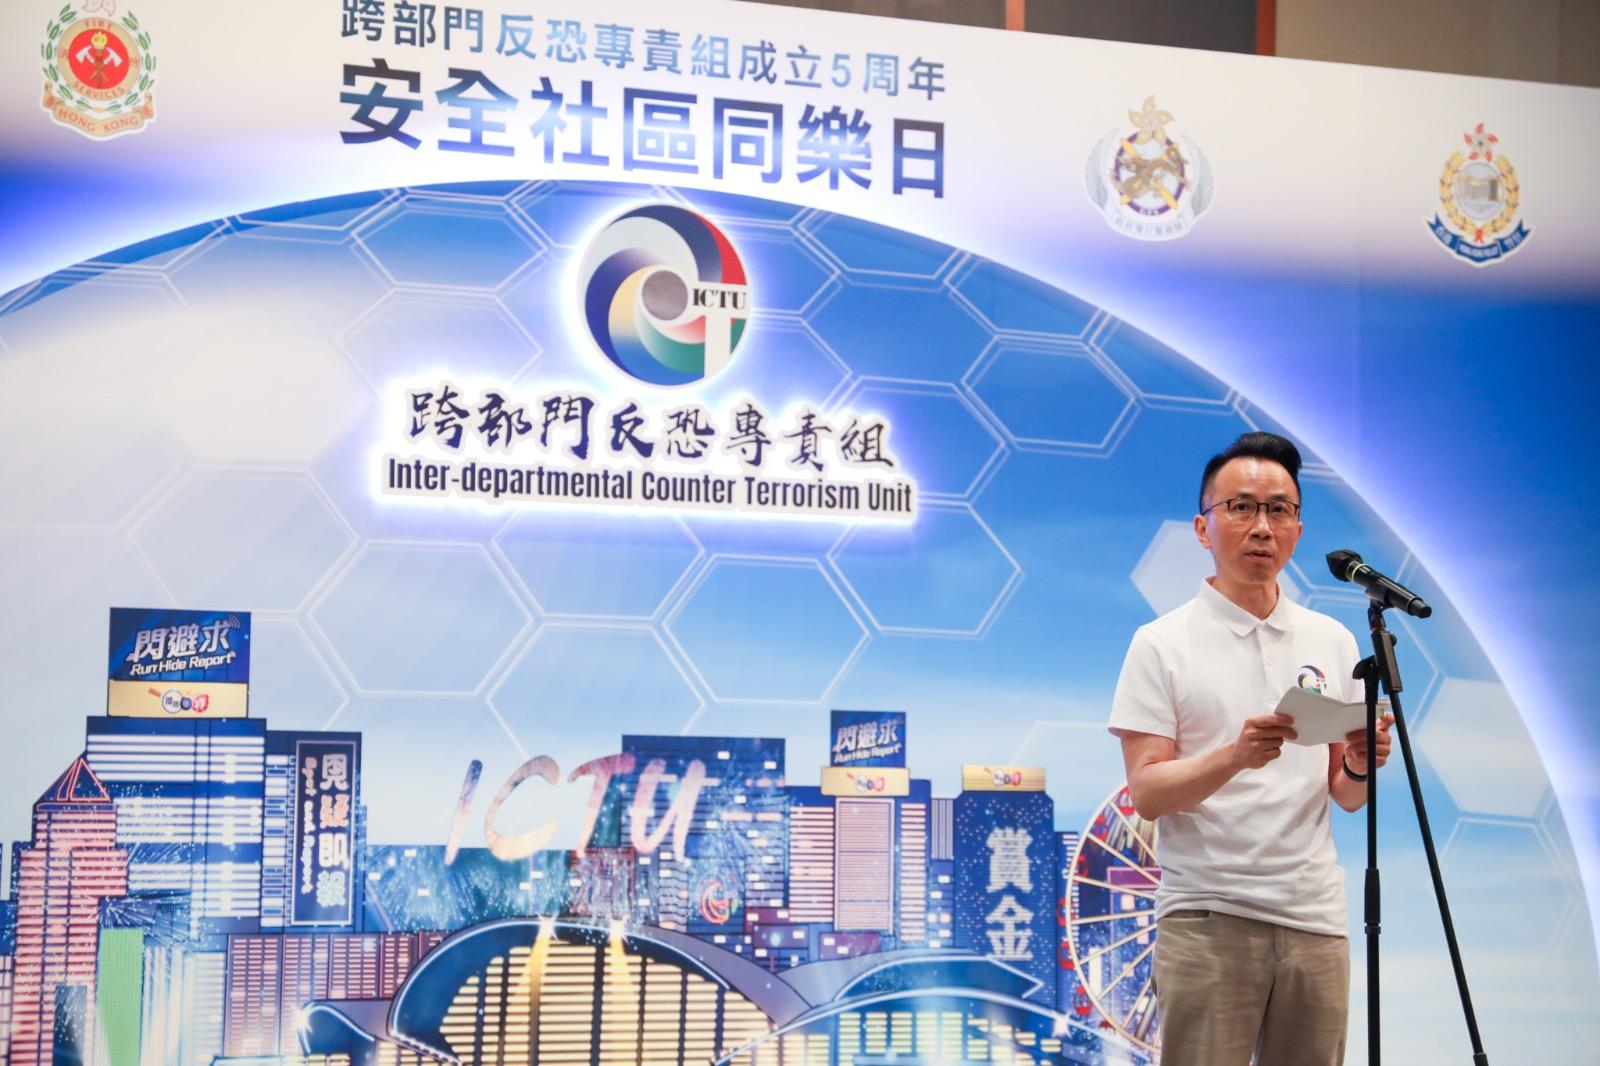 The “Safe Community Fun Day” organised by the Inter-departmental Counter Terrorism Unit was held today (April 29) at the Hong Kong Science Park. Photo shows the Permanent Secretary for Security, Mr Patrick Li, delivering a speech at the opening ceremony.